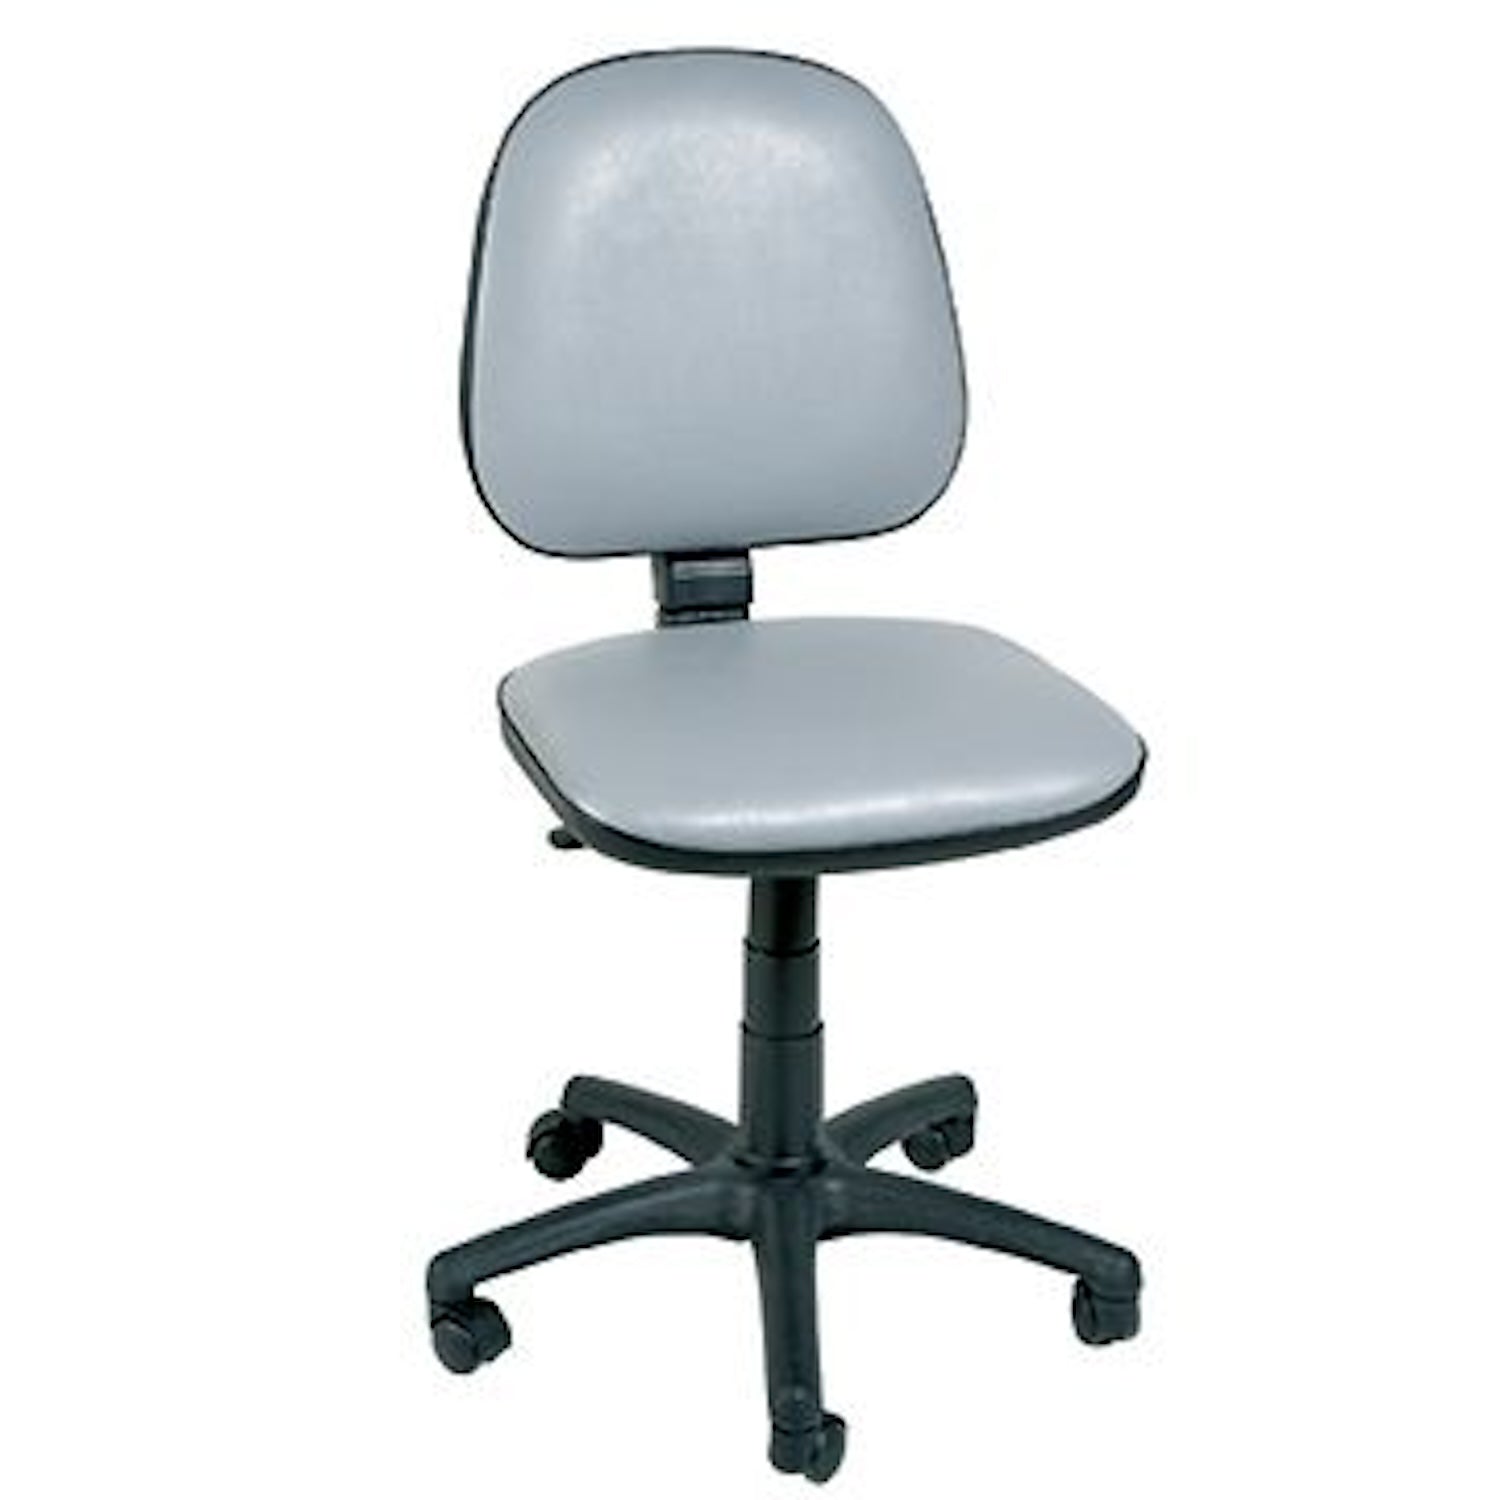 Sunflower Gas-Lift Chair without Arms & Sunflower Gas-Lift Chair Without Arms in Black